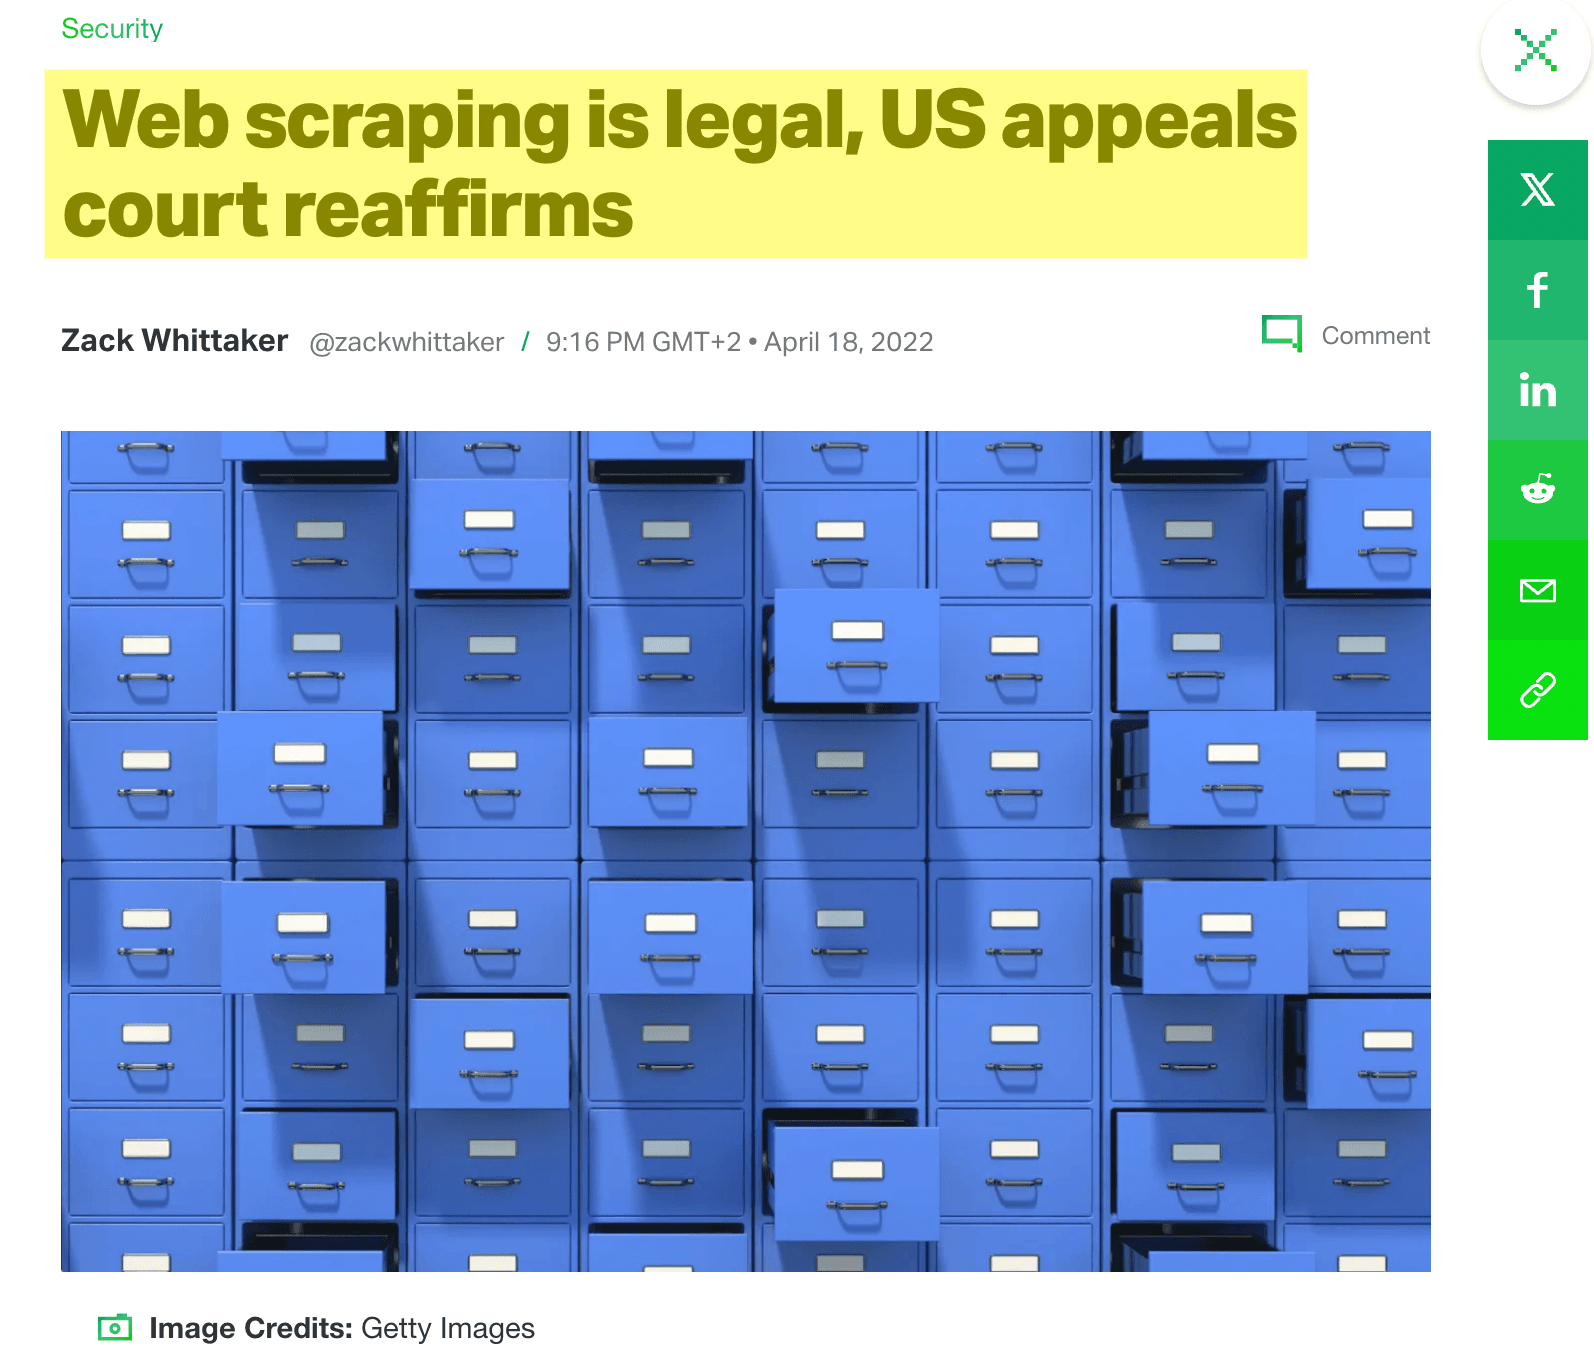 techcrunch article web scraping is legal - image6.png